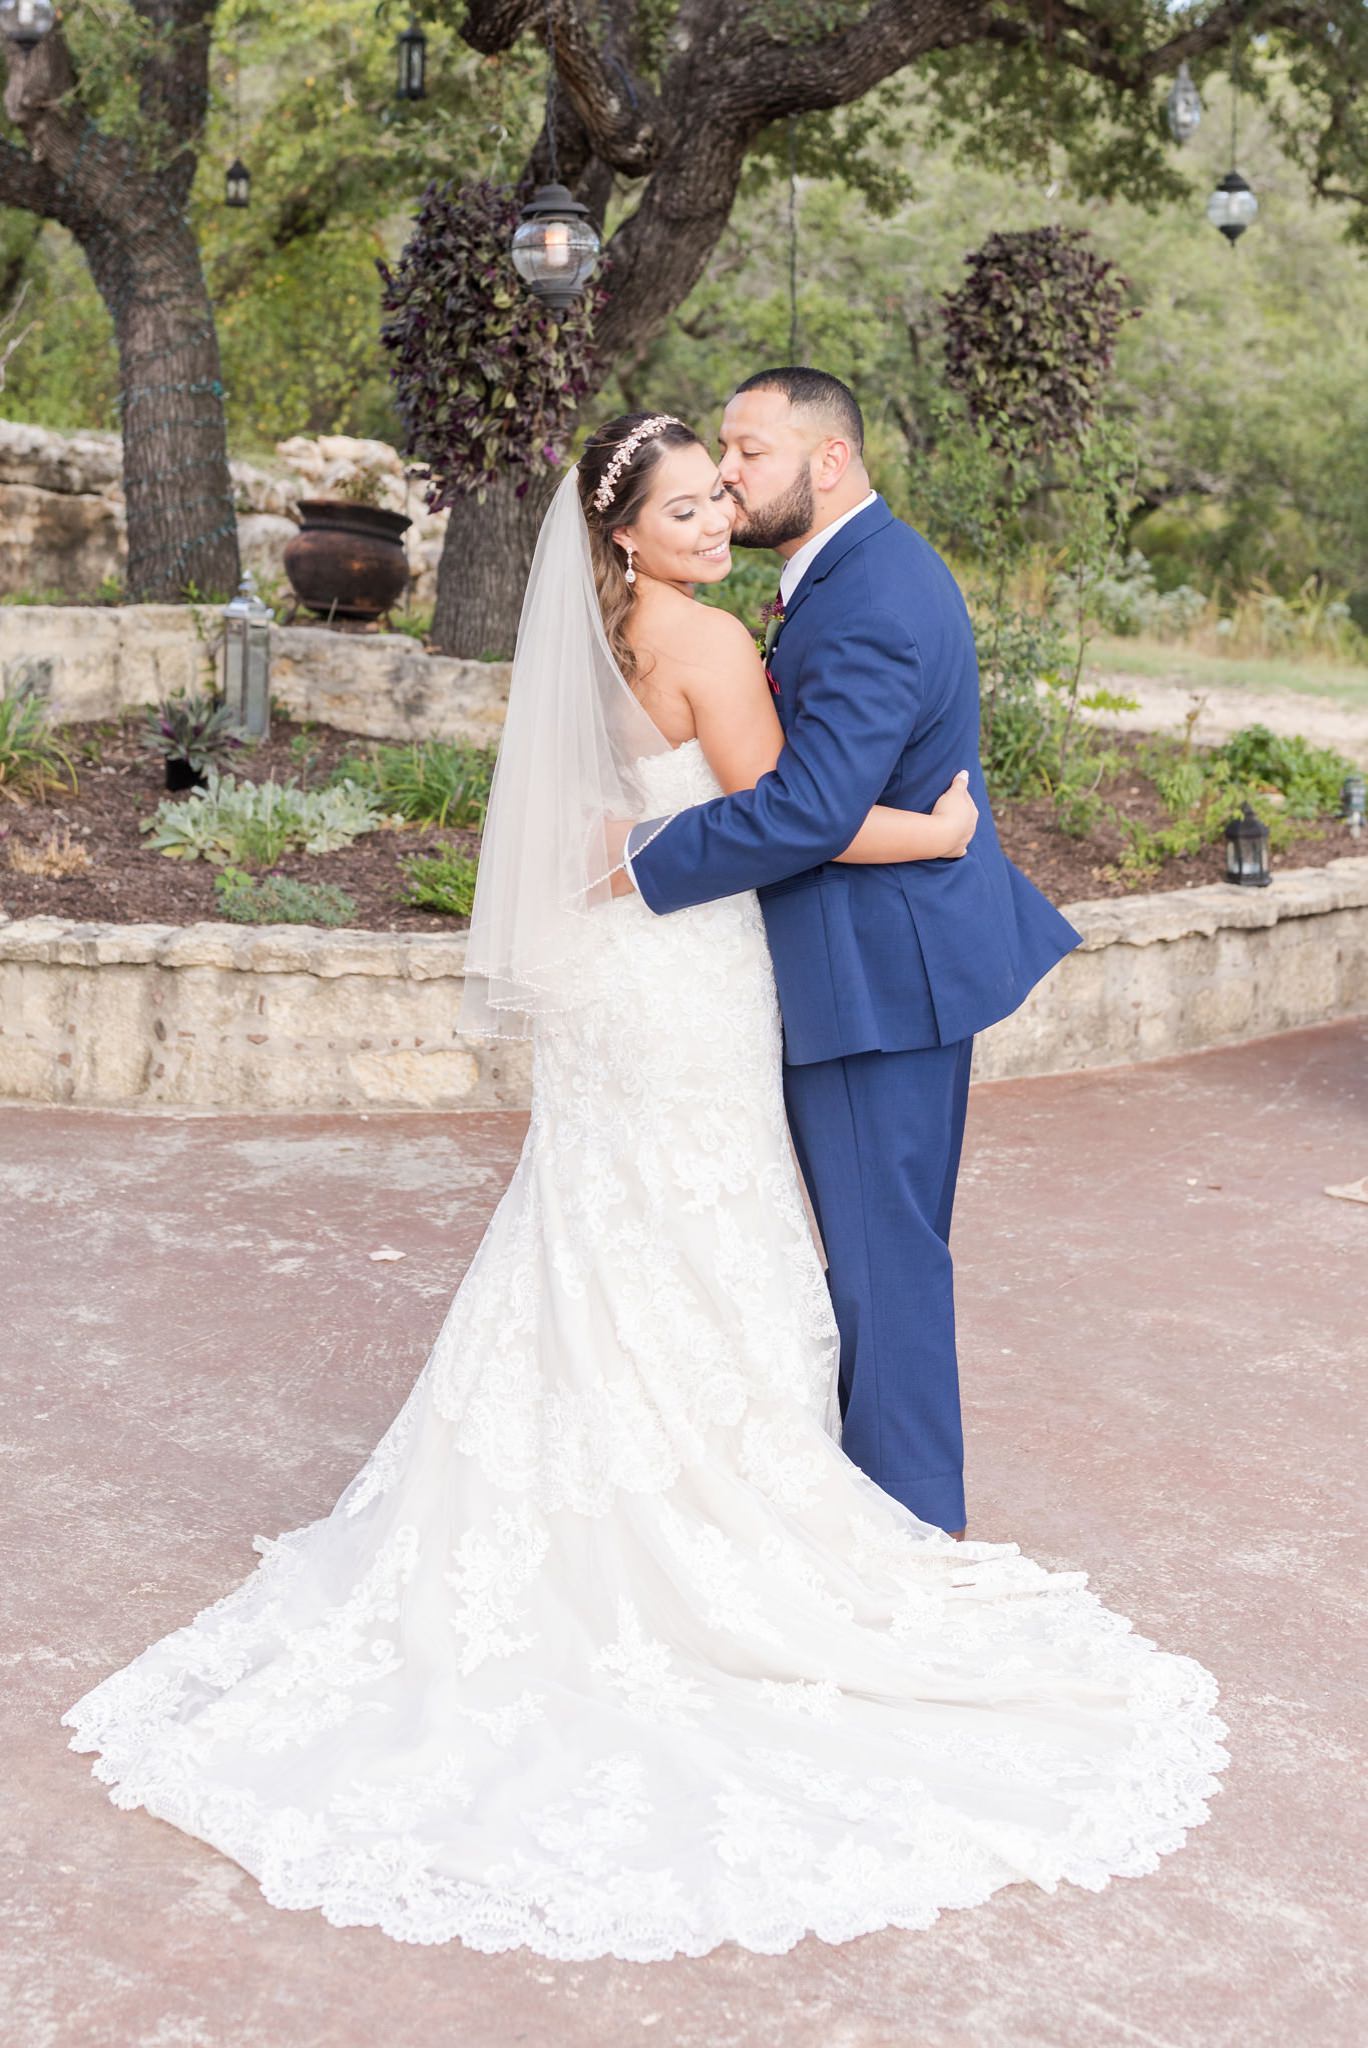 A Burgundy and Navy Wedding at the Oaks at Heavenly in Helotes, TX by Dawn Elizabeth Studios, San Antonio Wedding Photographer